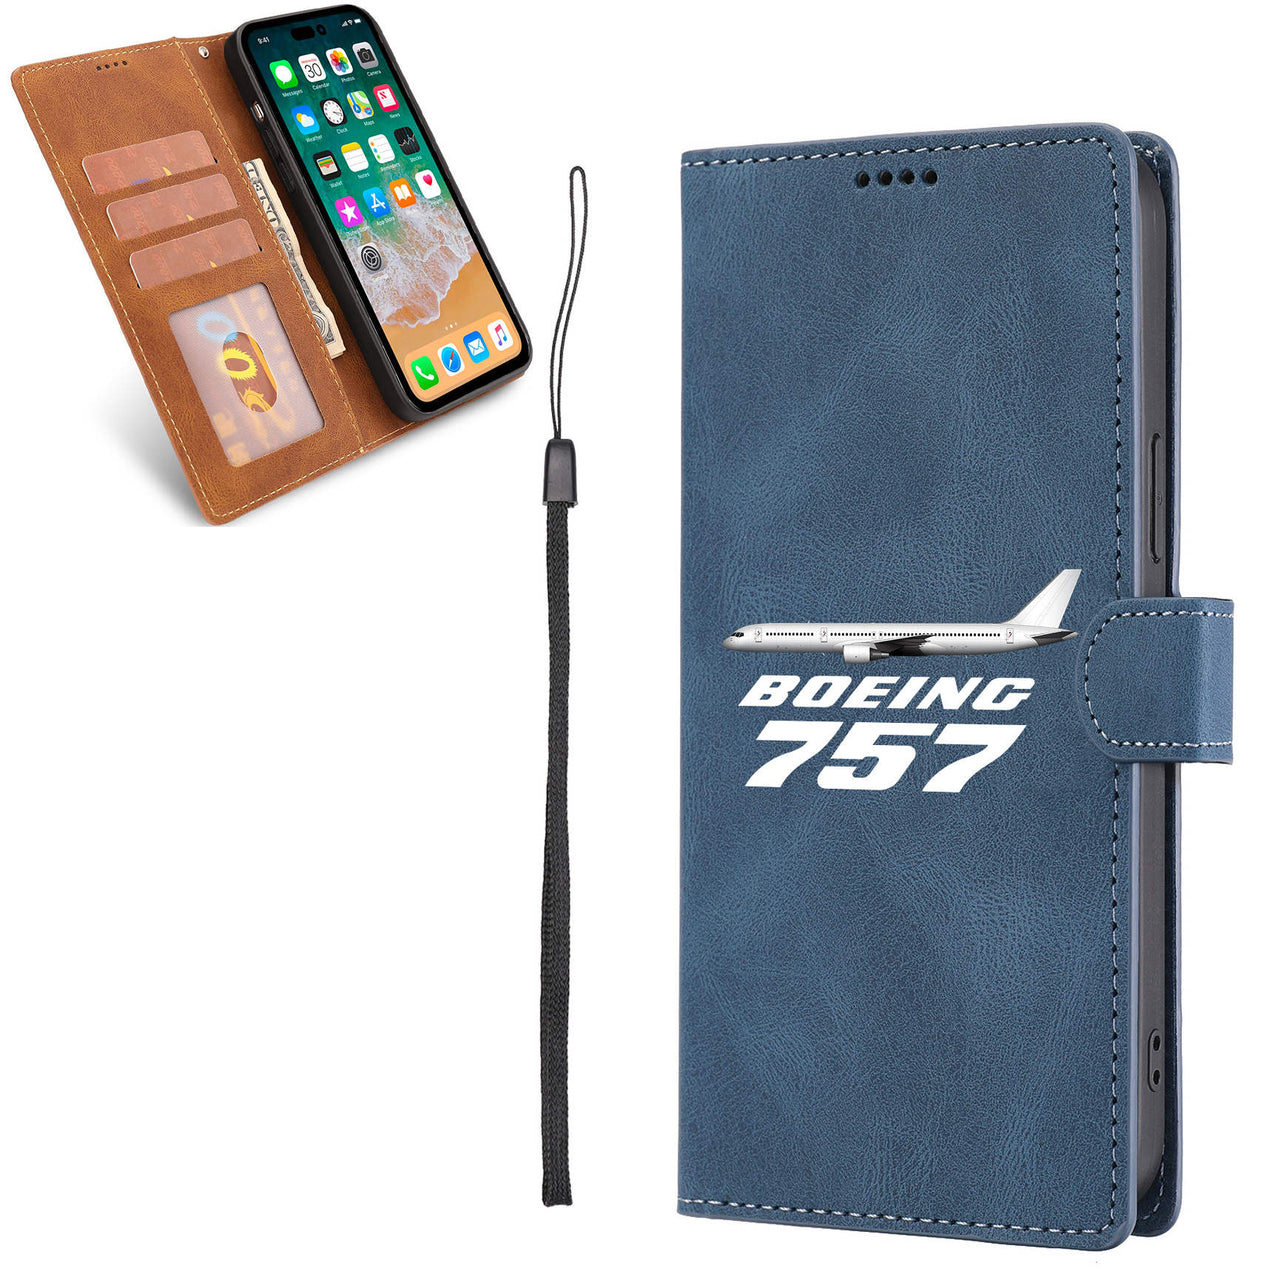 The Boeing 757 Designed Leather iPhone Cases